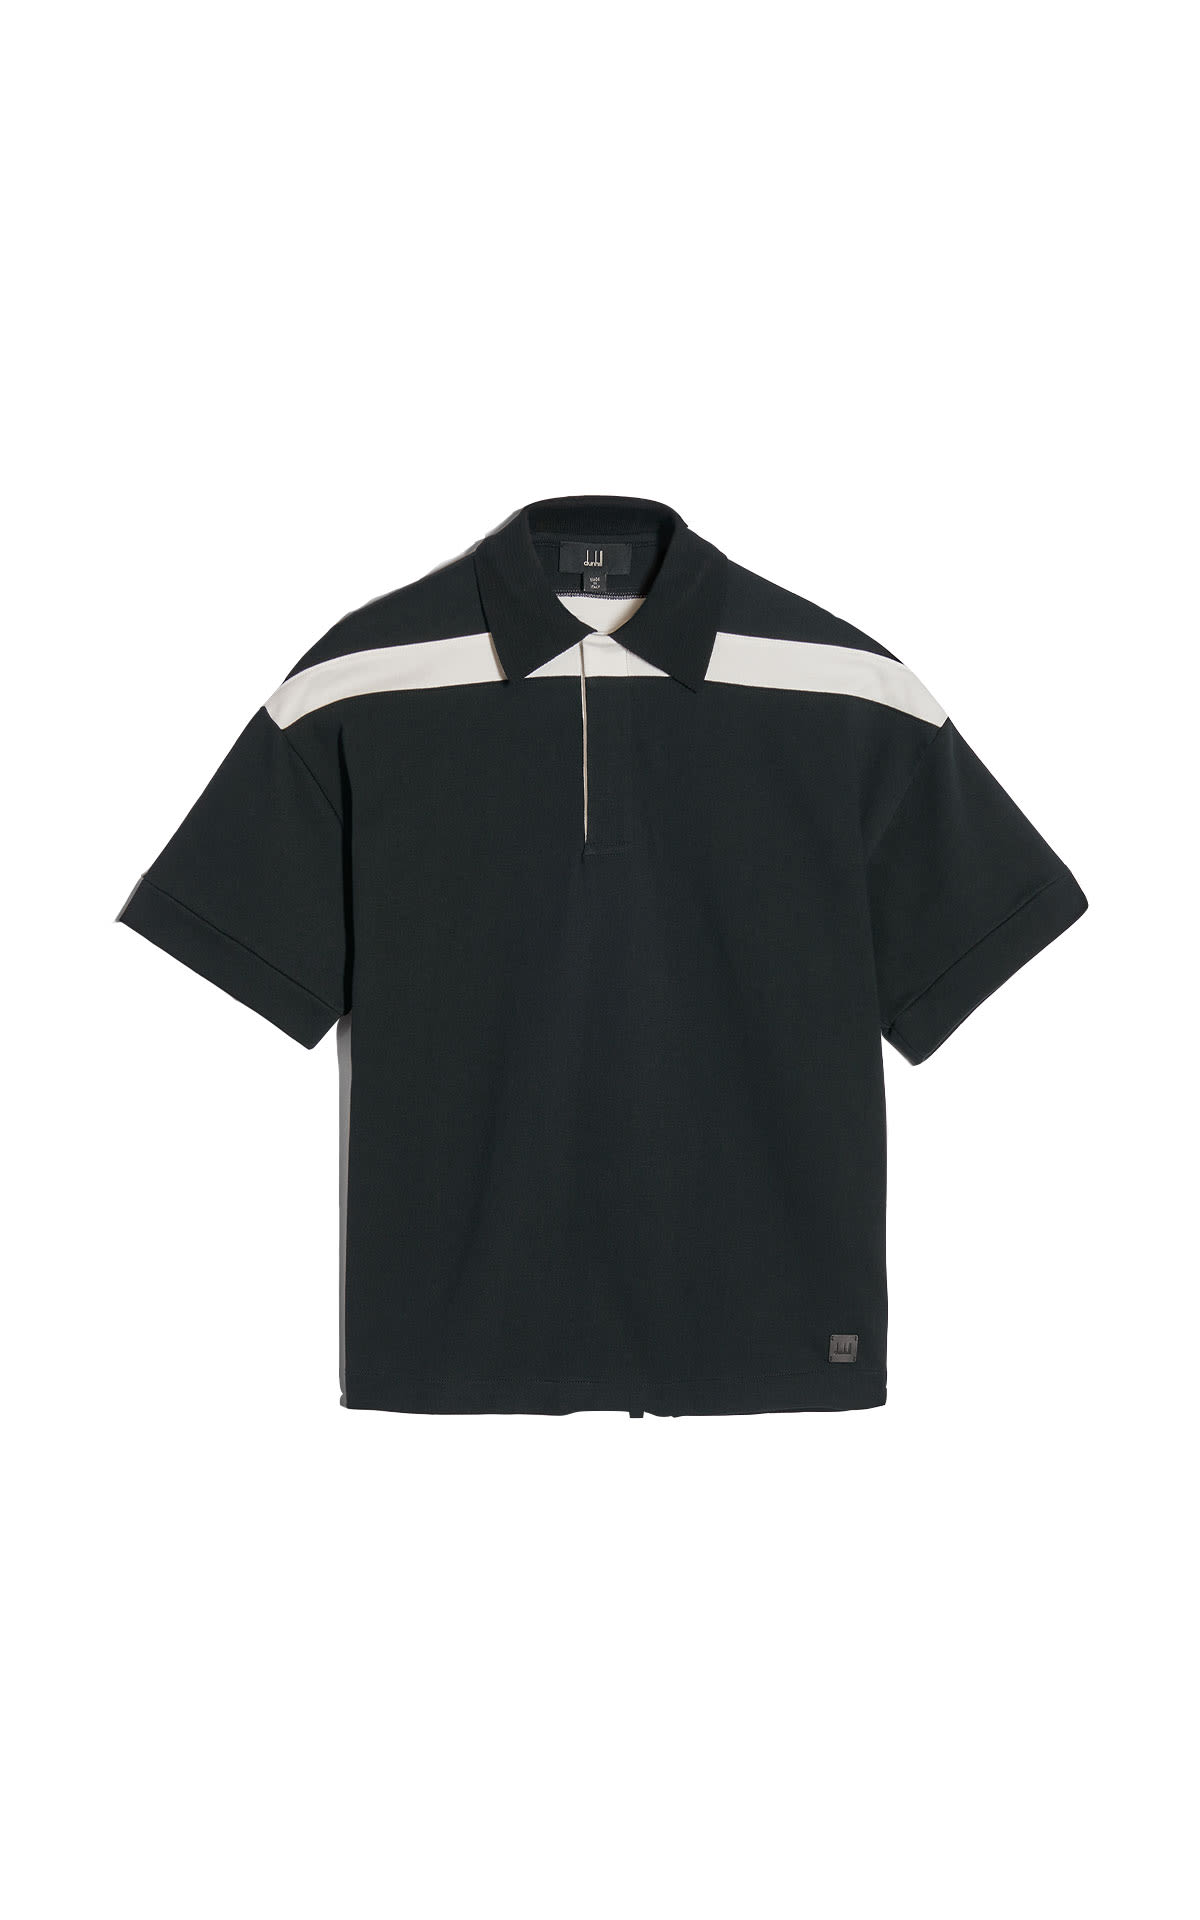 dunhill Stripe detail polo t-shirt black from Bicester Village